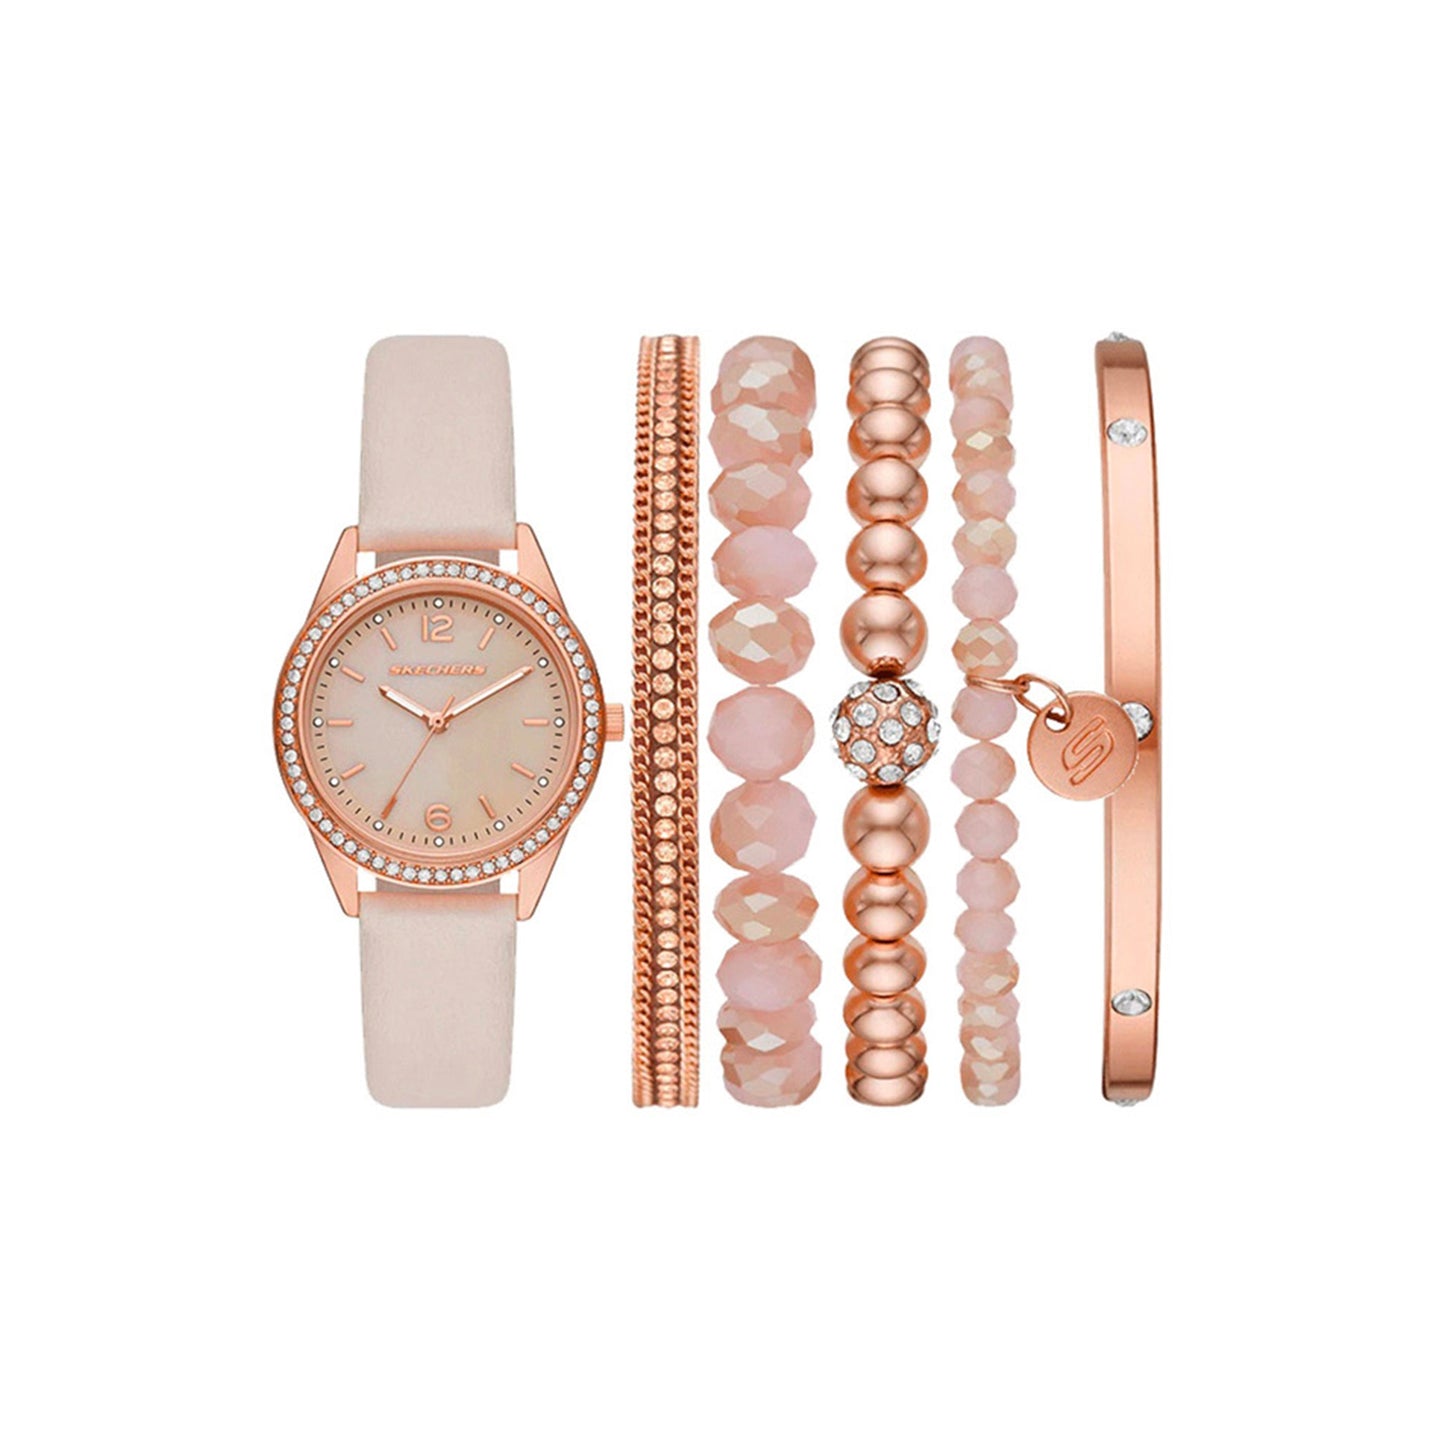 Blush and Rose Gold Mother-of-Pearl Stackable Watch and Bracelet Set